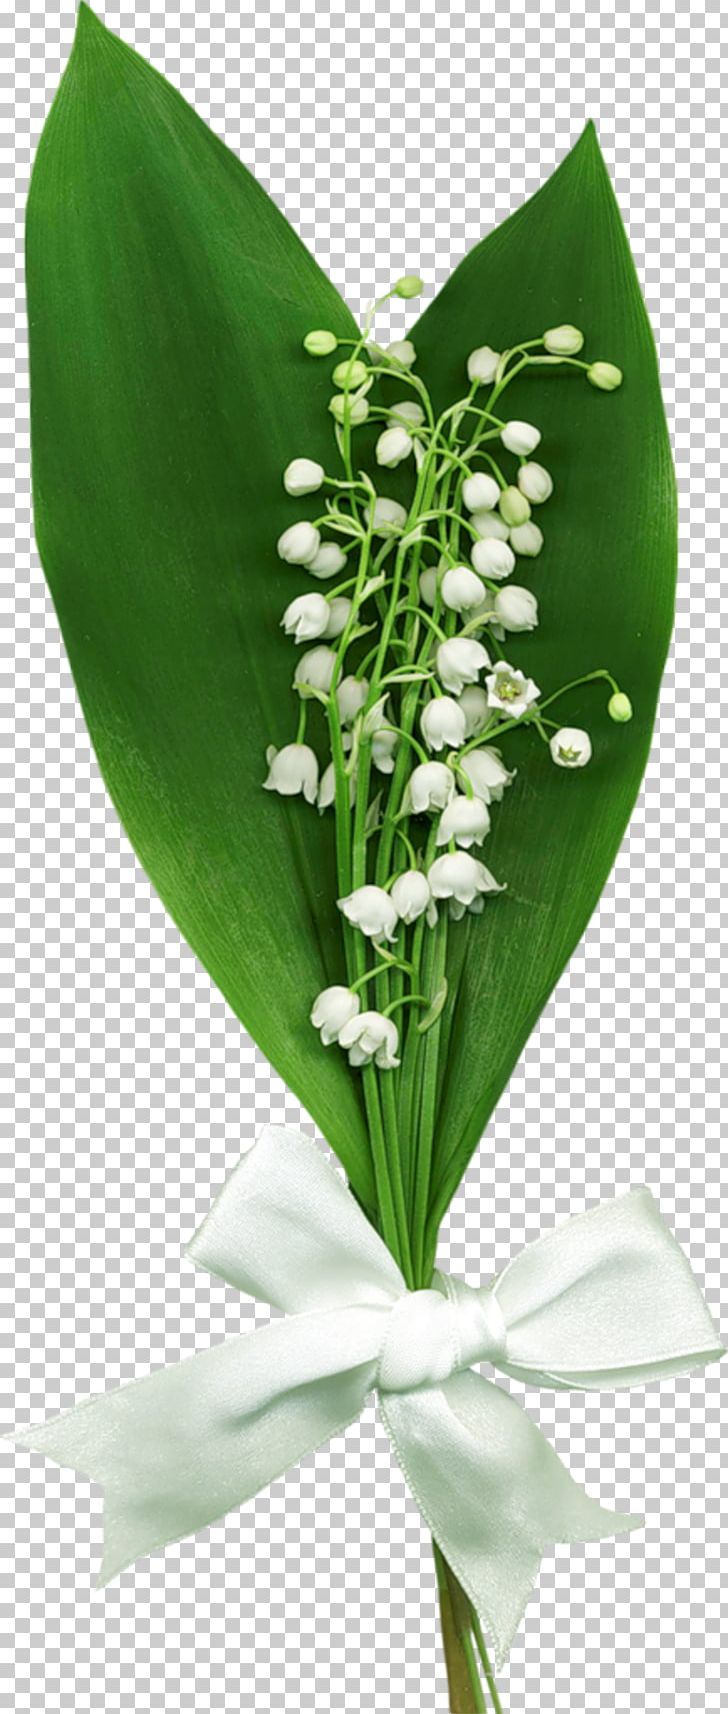 Lily Of The Valley PNG, Clipart, Animation, Convallaria, Cut Flowers, Floral Design, Floristry Free PNG Download